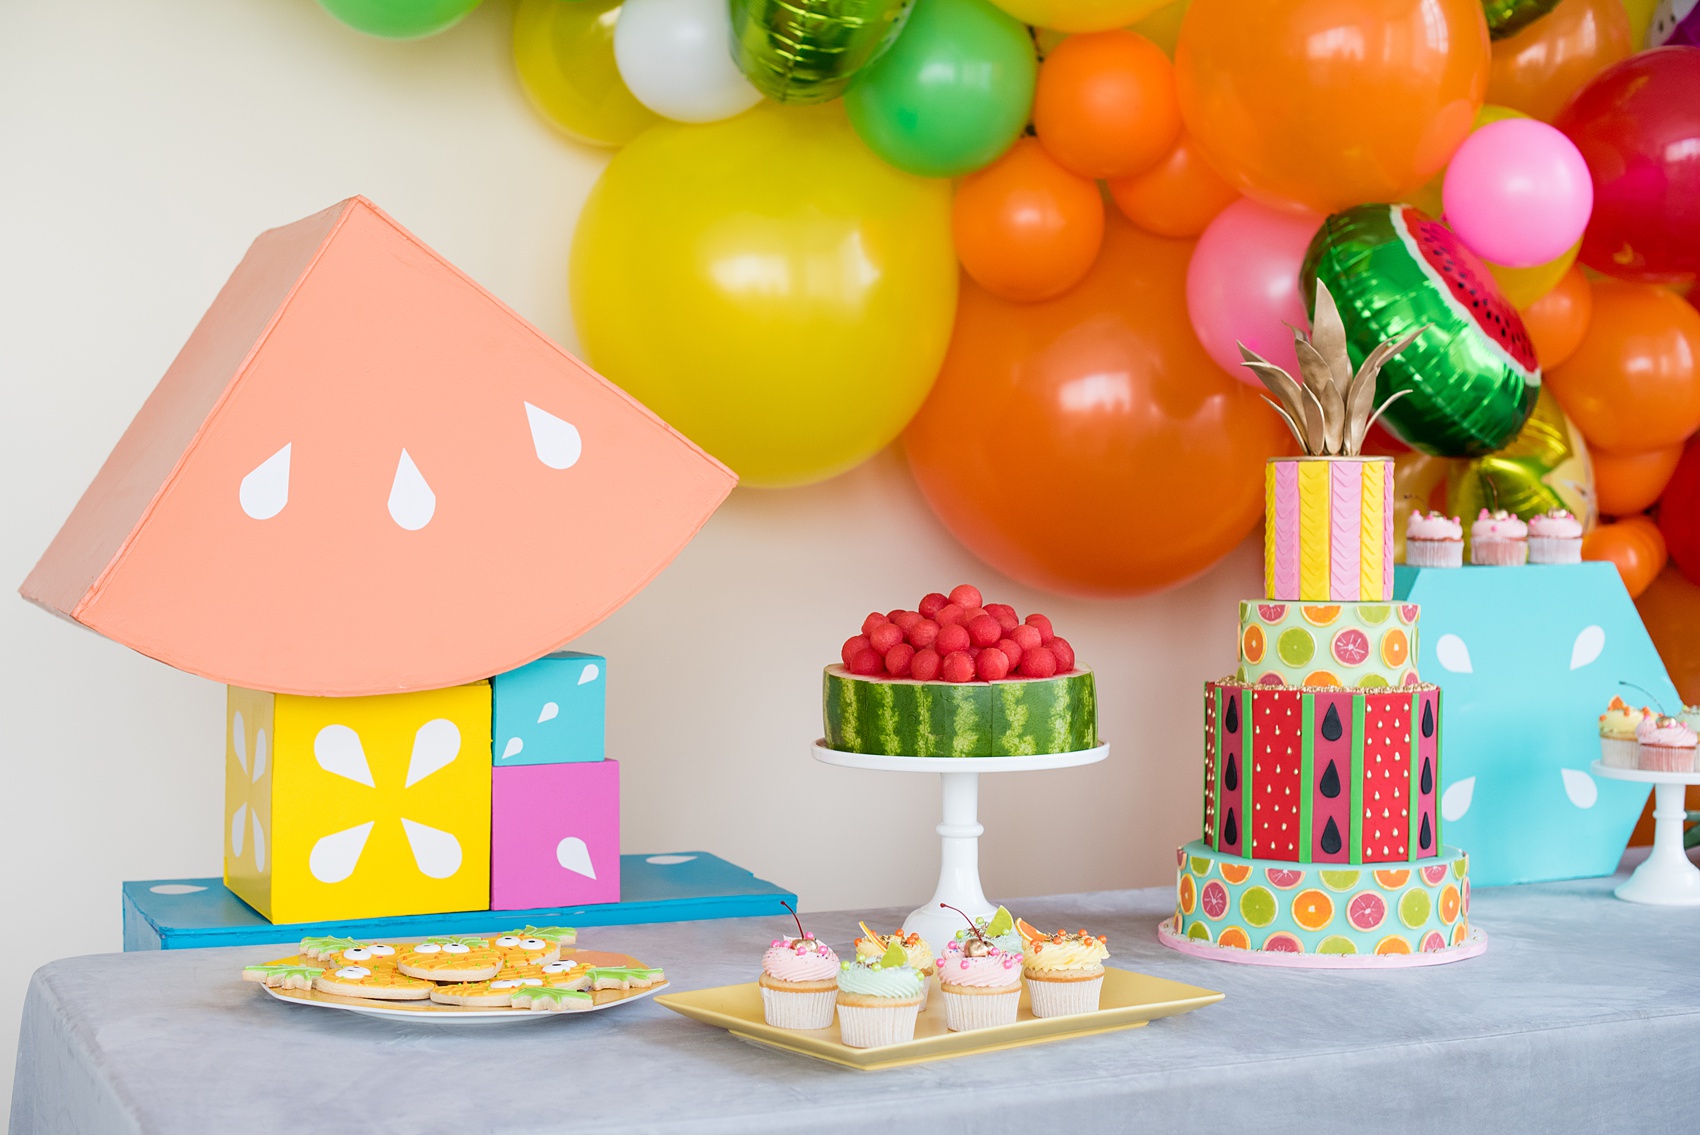 Mikkel Paige Photography photos of a Tutti Frutti theme birthday party. Featured on Martha Stewart. Picture of a dessert table with cake by Sugar Monster, cookies by Sweet Dani B and balloon and shapes by Michelle Bablo. Coordination by Color Pop Events.